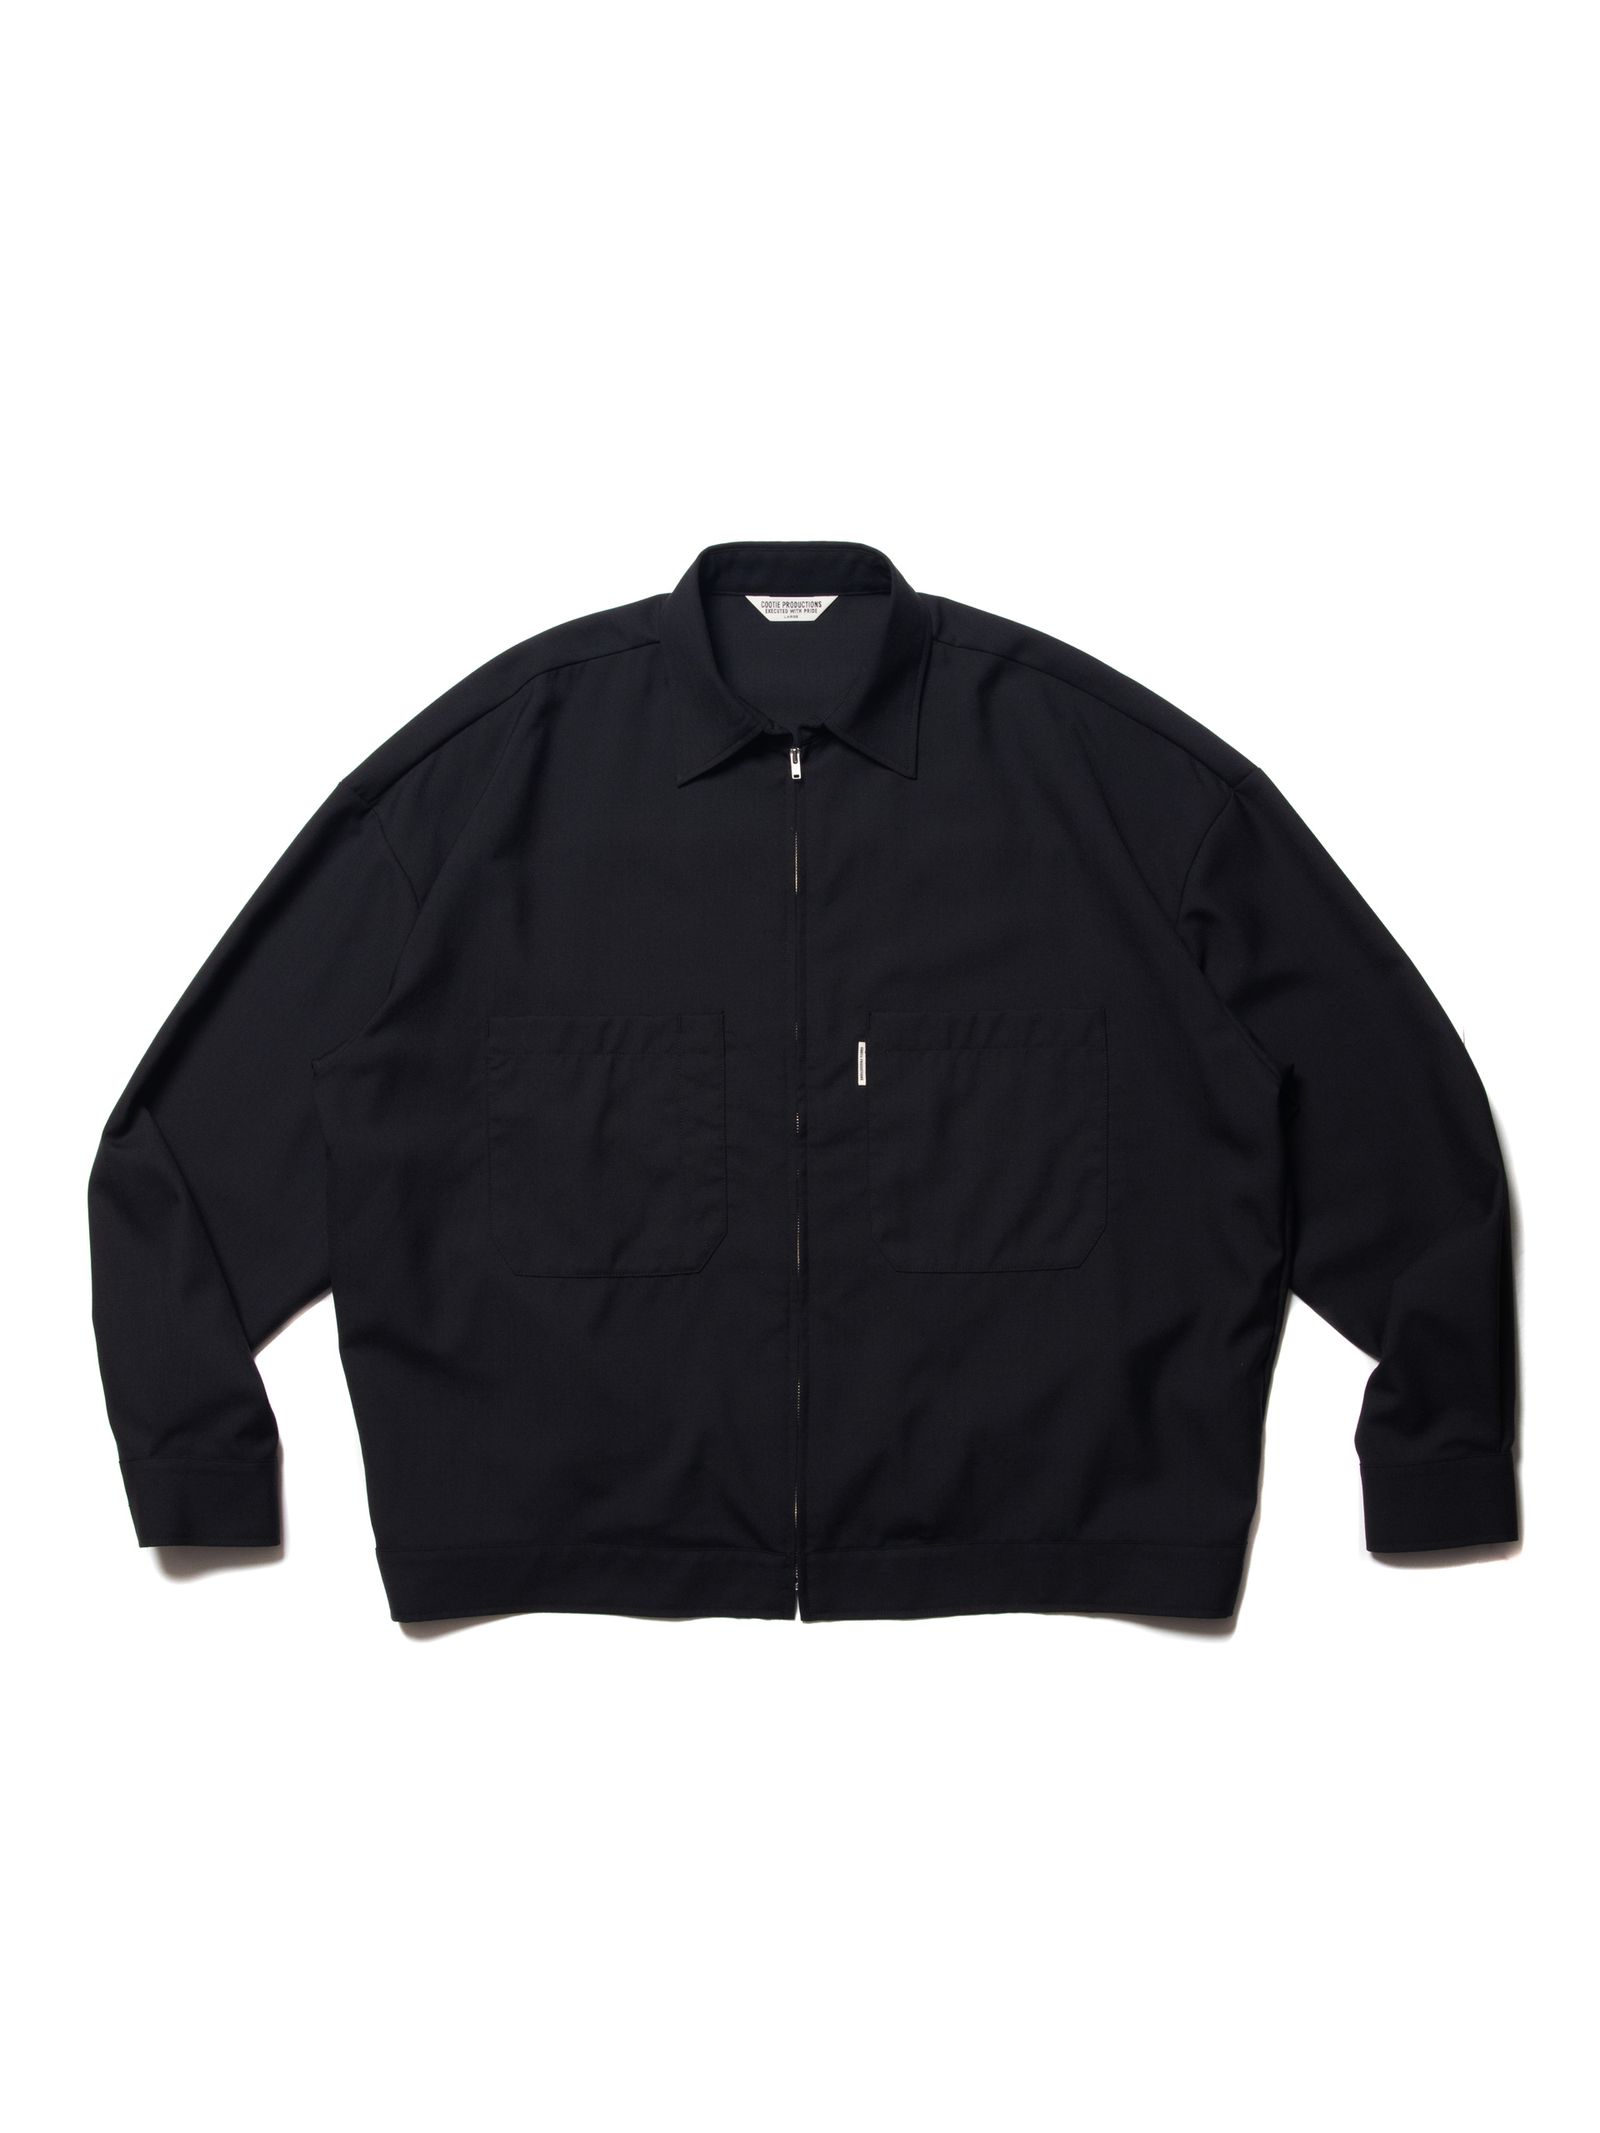 COOTIE PRODUCTIONS - 【ラスト1点】T/W WORK JACKET (BLACK